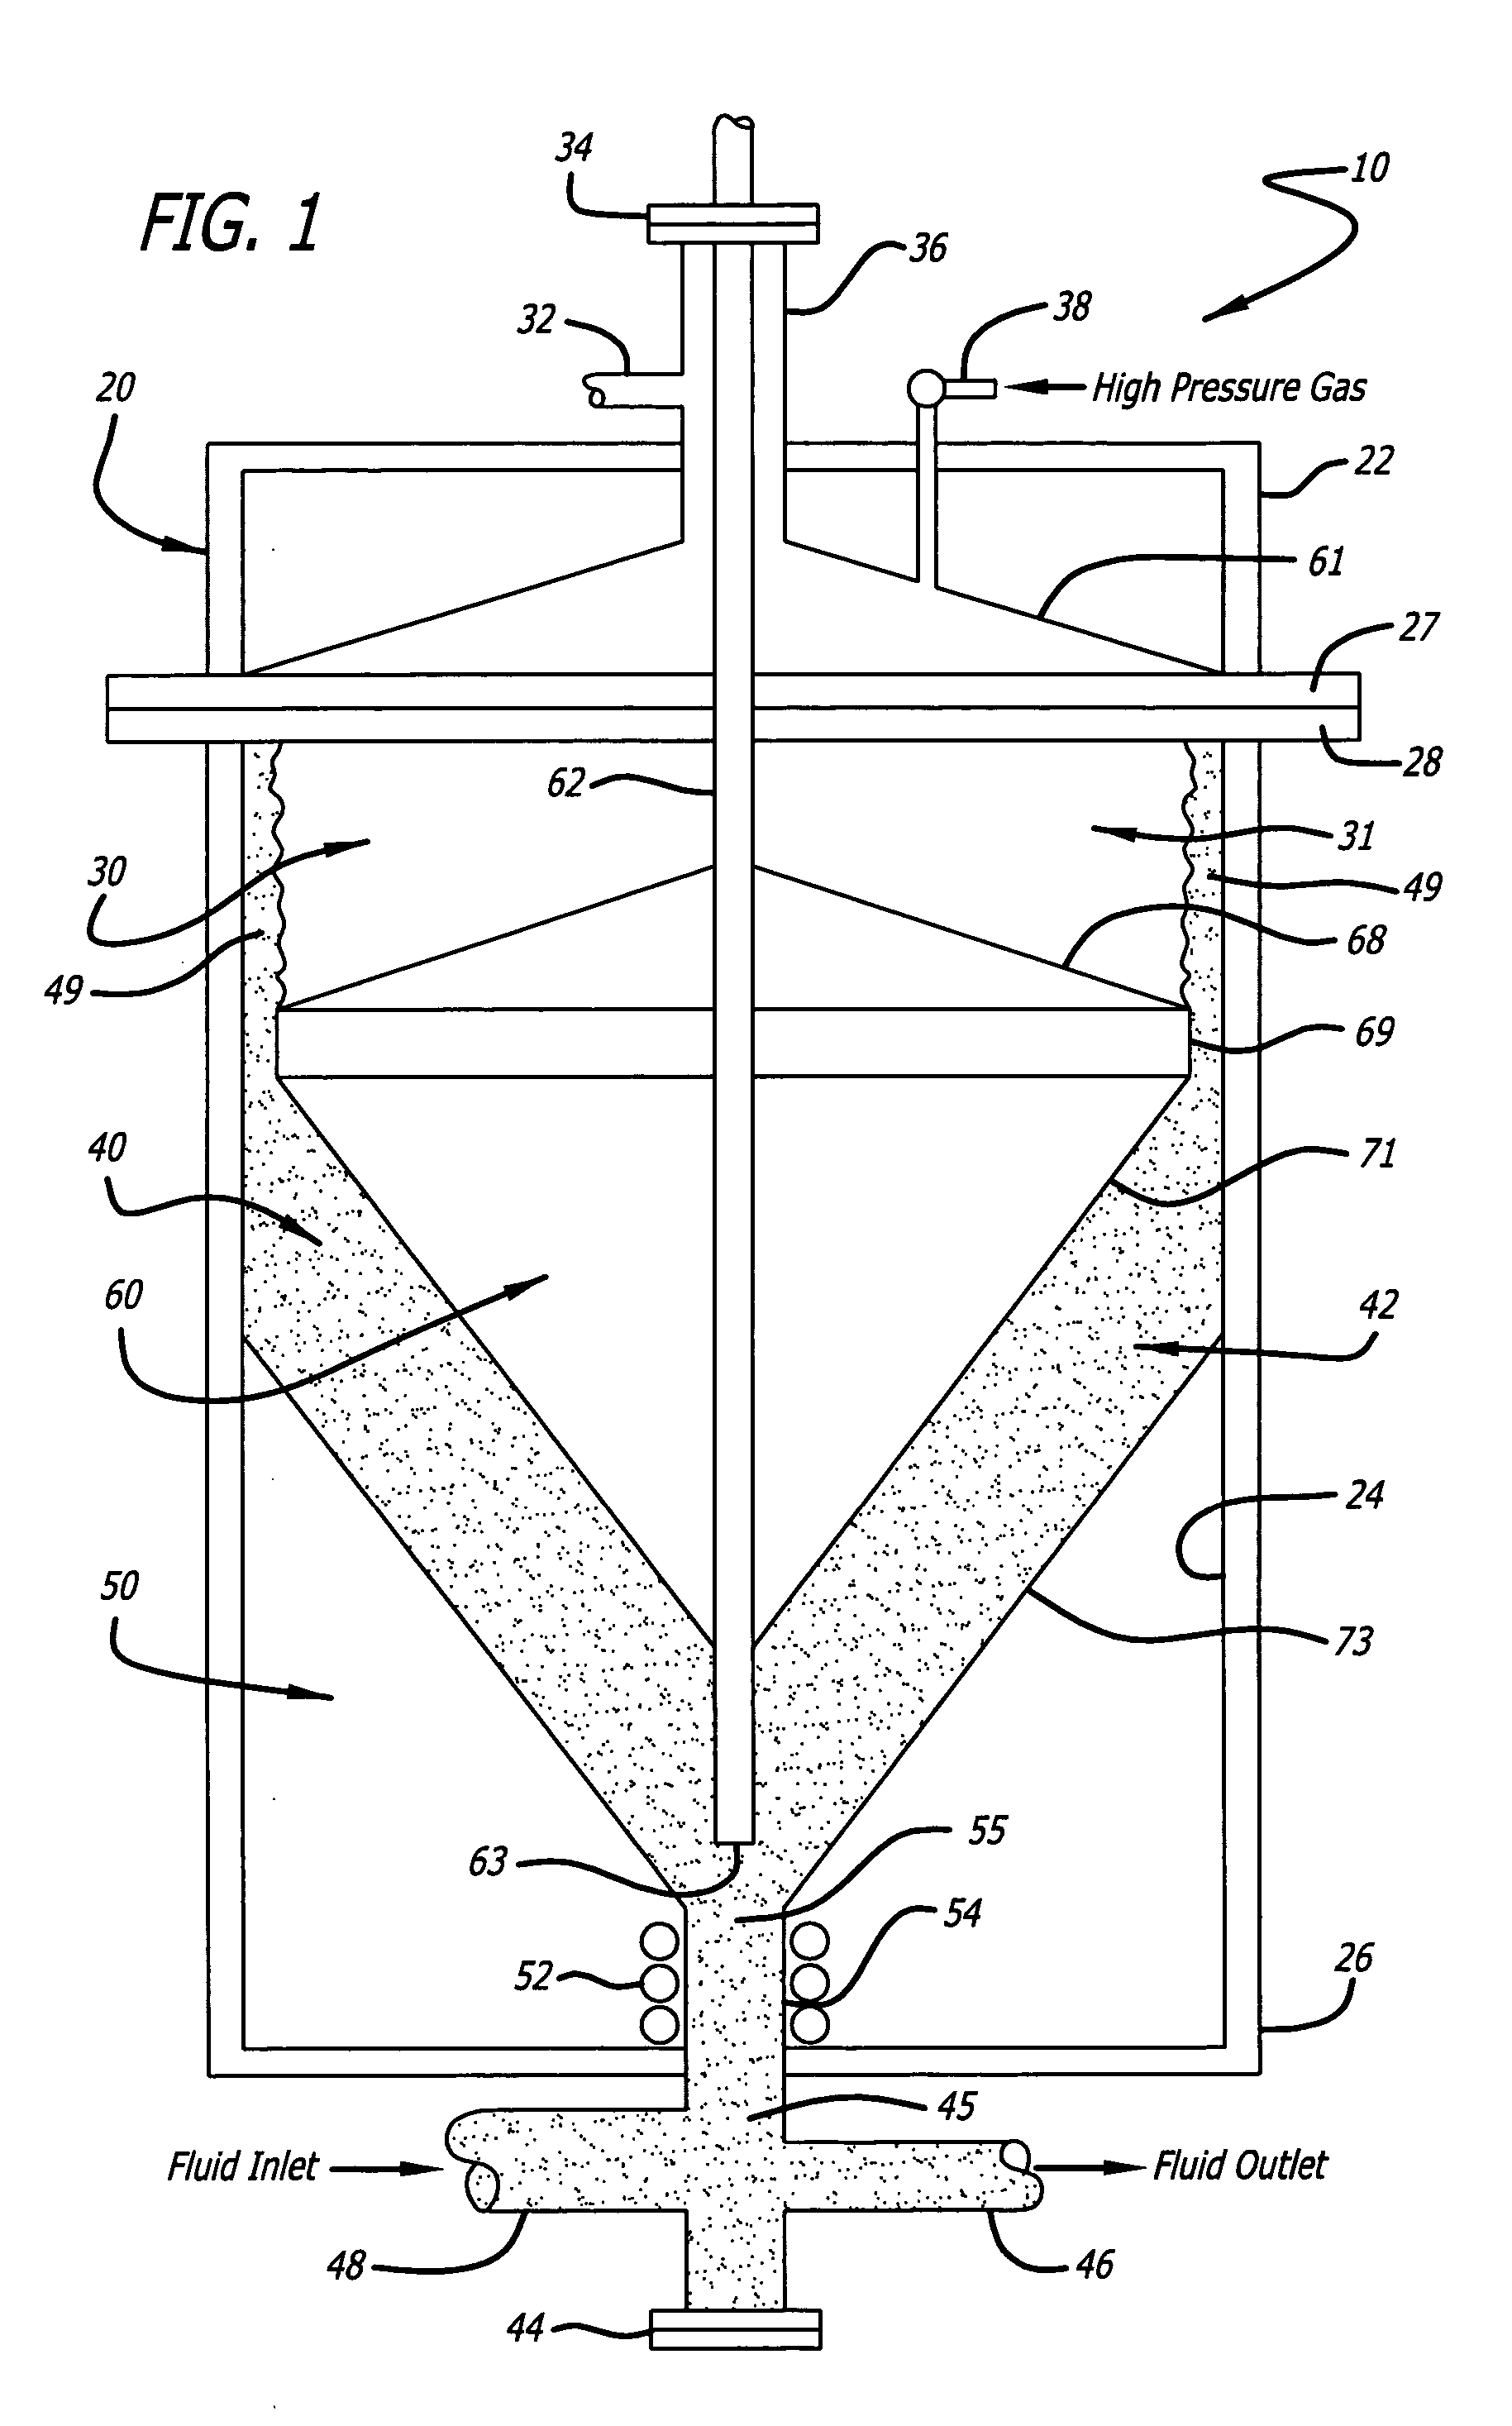 Refillable material transfer system